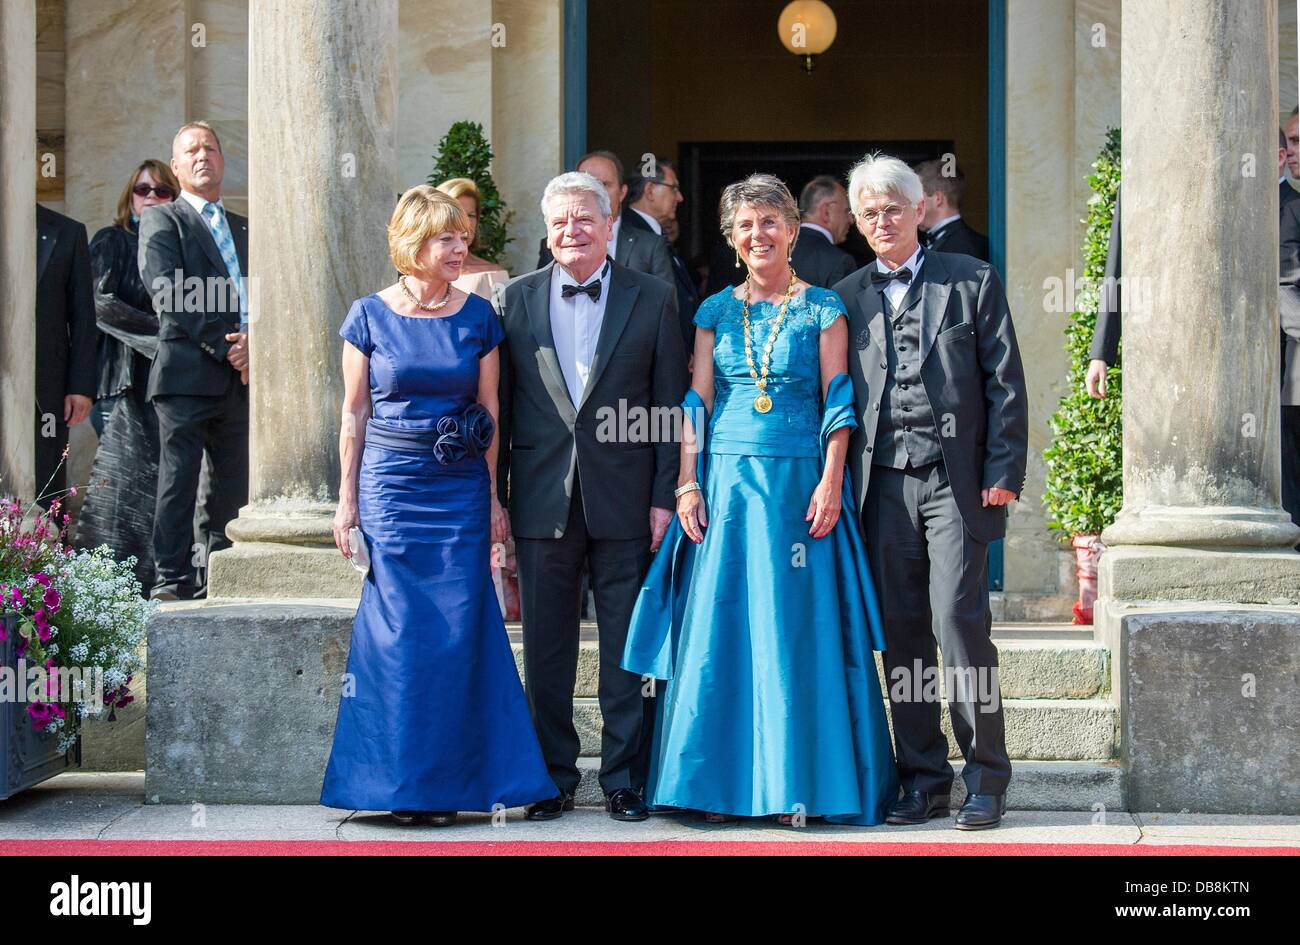 Bayreuth, Germany. 25th July, 2013. German Federal President Joachim Gauck (2nd L), his partner Daniela Schadt (l), Brigitte Merk-Erbe, mayor of Bayreuth, and her husband Thomas Erbe arrive at the opening of the Bayreuth Festival 2013 in Bayreuth, Germany, 25 July 2013. The one-month Wagner festival is Germany's most prestigious culture event. Photo: Tobias Hase/dpa/Alamy Live News Stock Photo